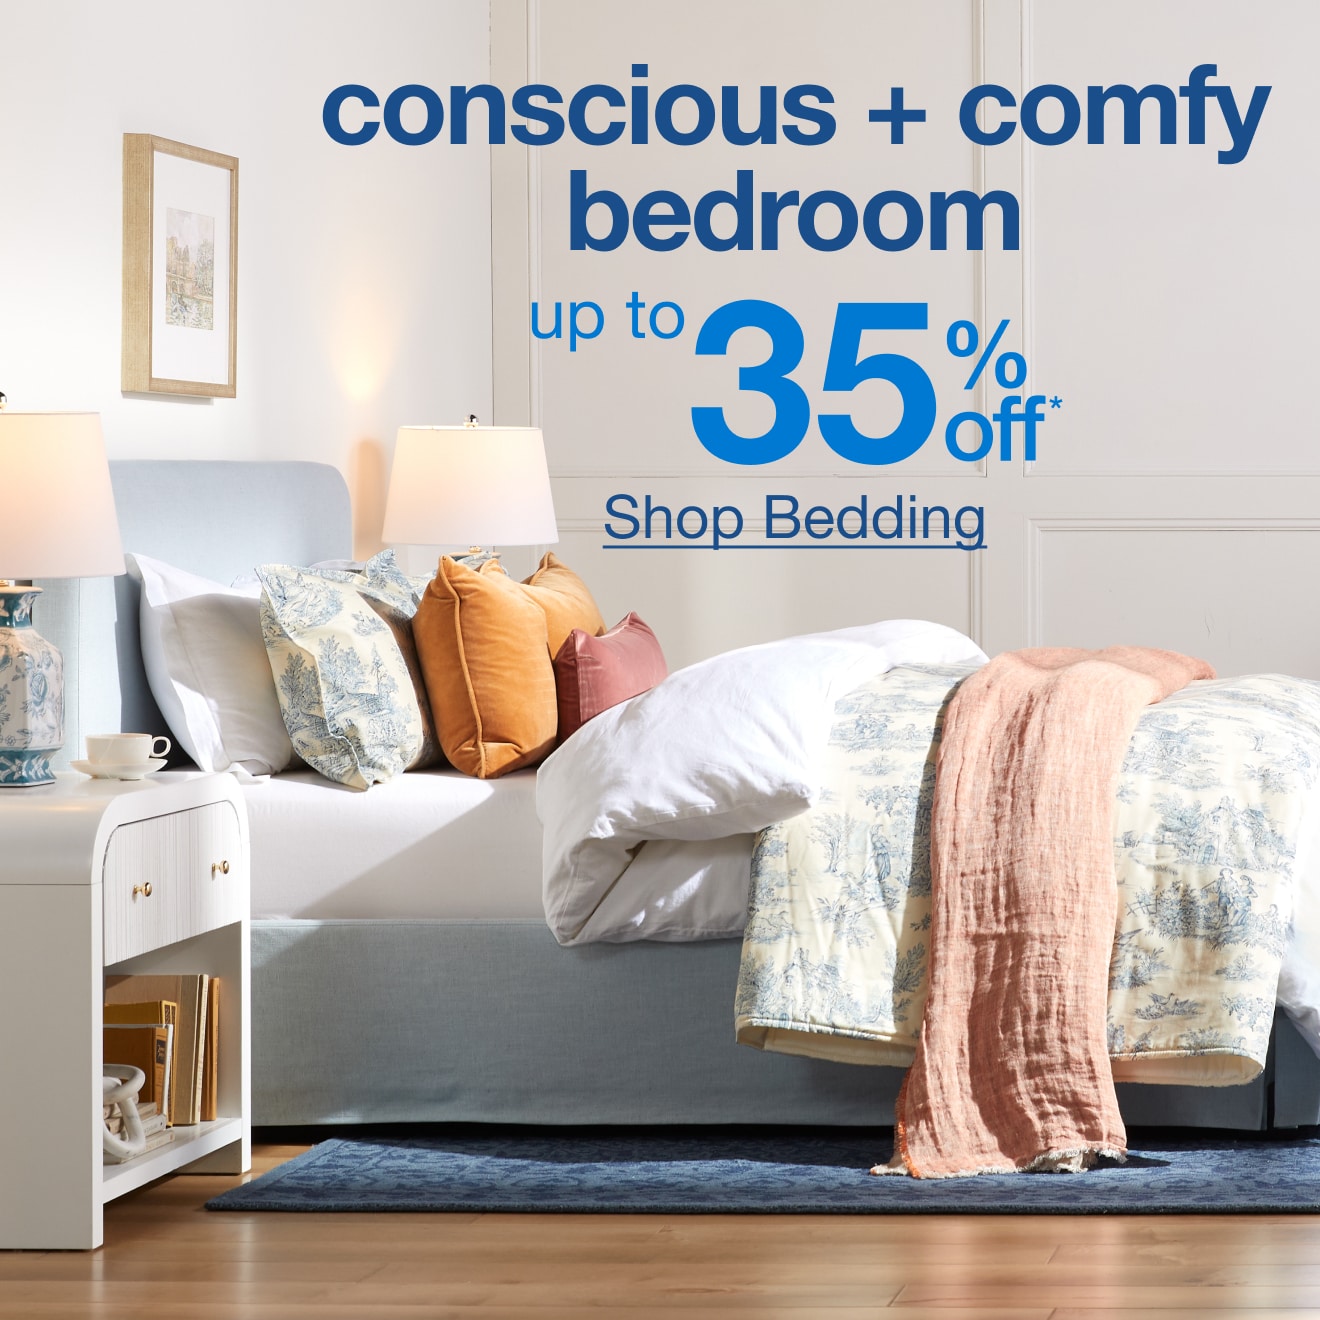 Up to 35% Off Bedding - Shop Now!